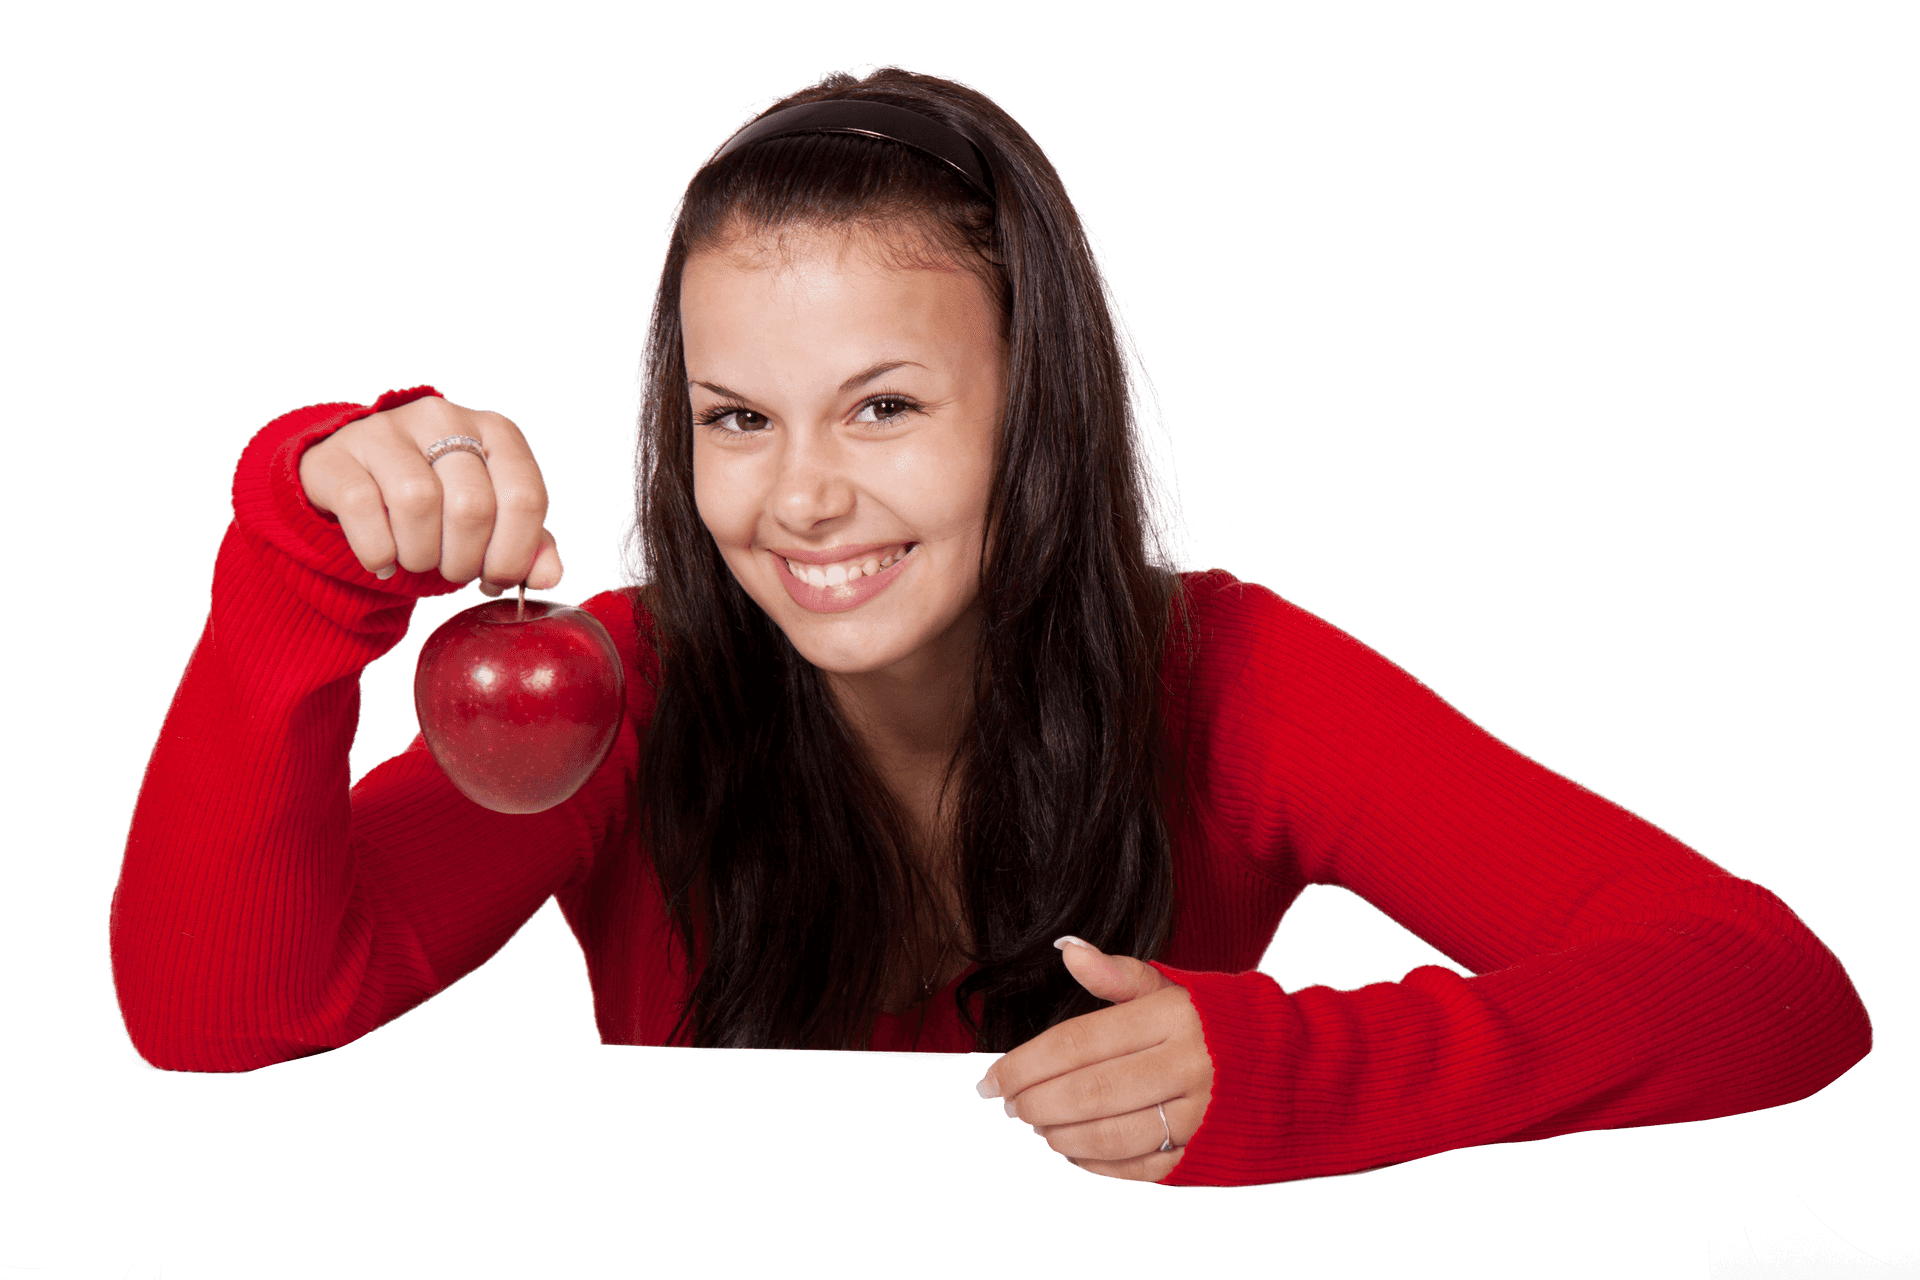 Smiling Girl Holding Red Apple PNG image